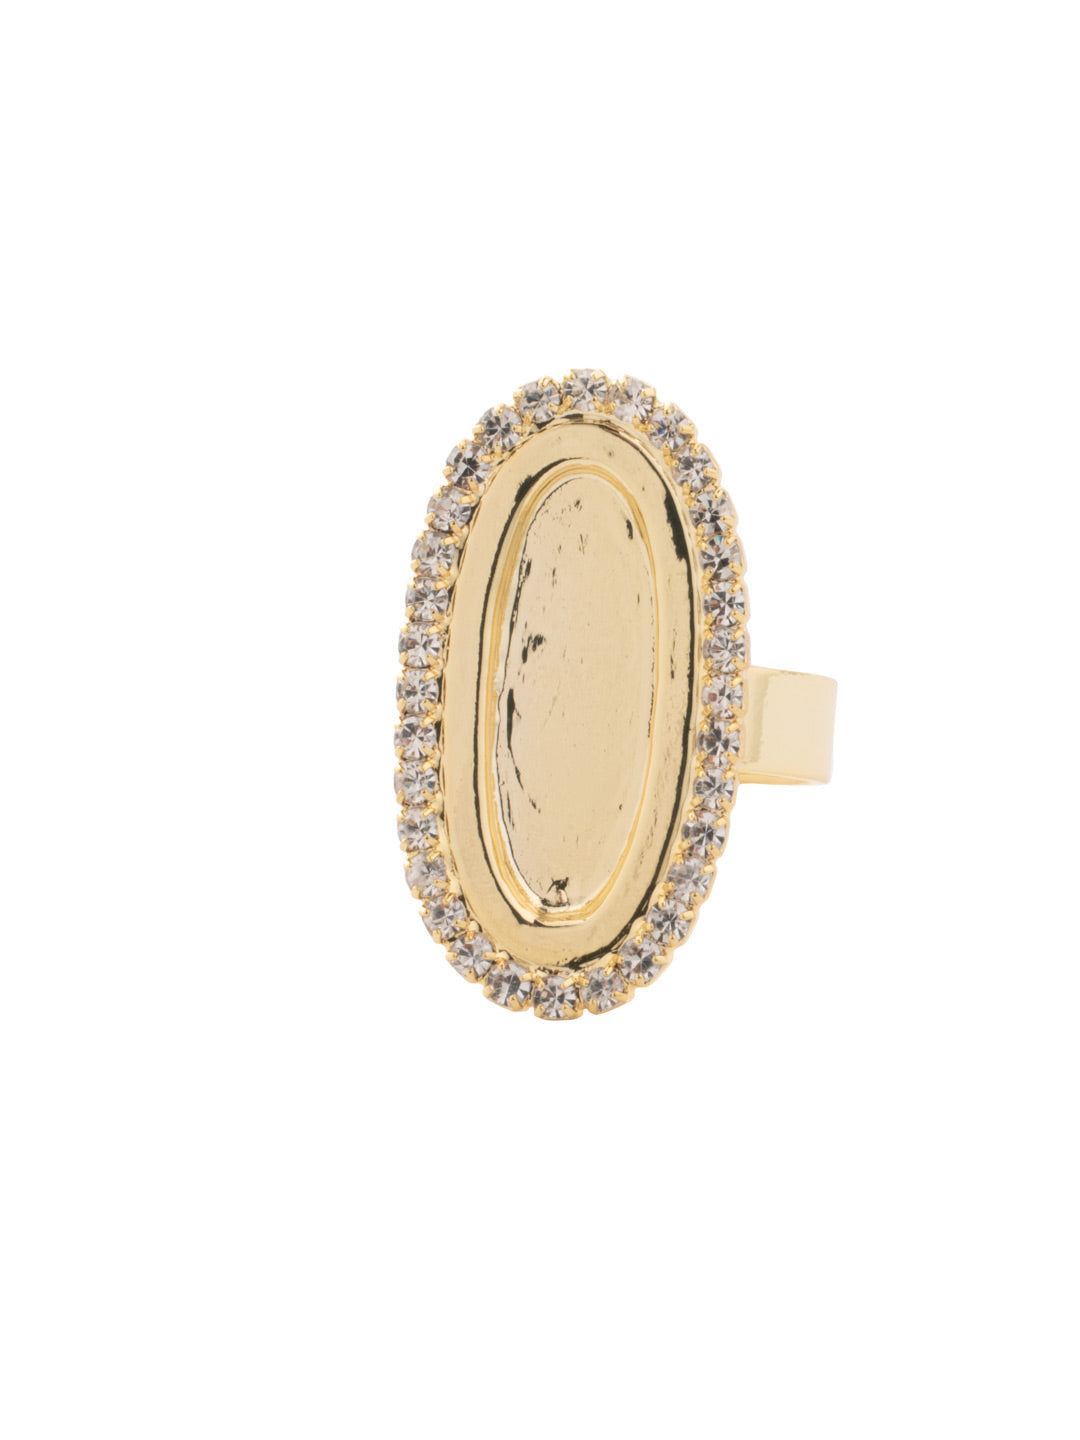 Tori Statement Ring - RFL3BGCRY - <p>The Tori Statement Ring features a rhinestone embellished filled chain link on an adjustable ring band. From Sorrelli's Crystal collection in our Bright Gold-tone finish.</p>